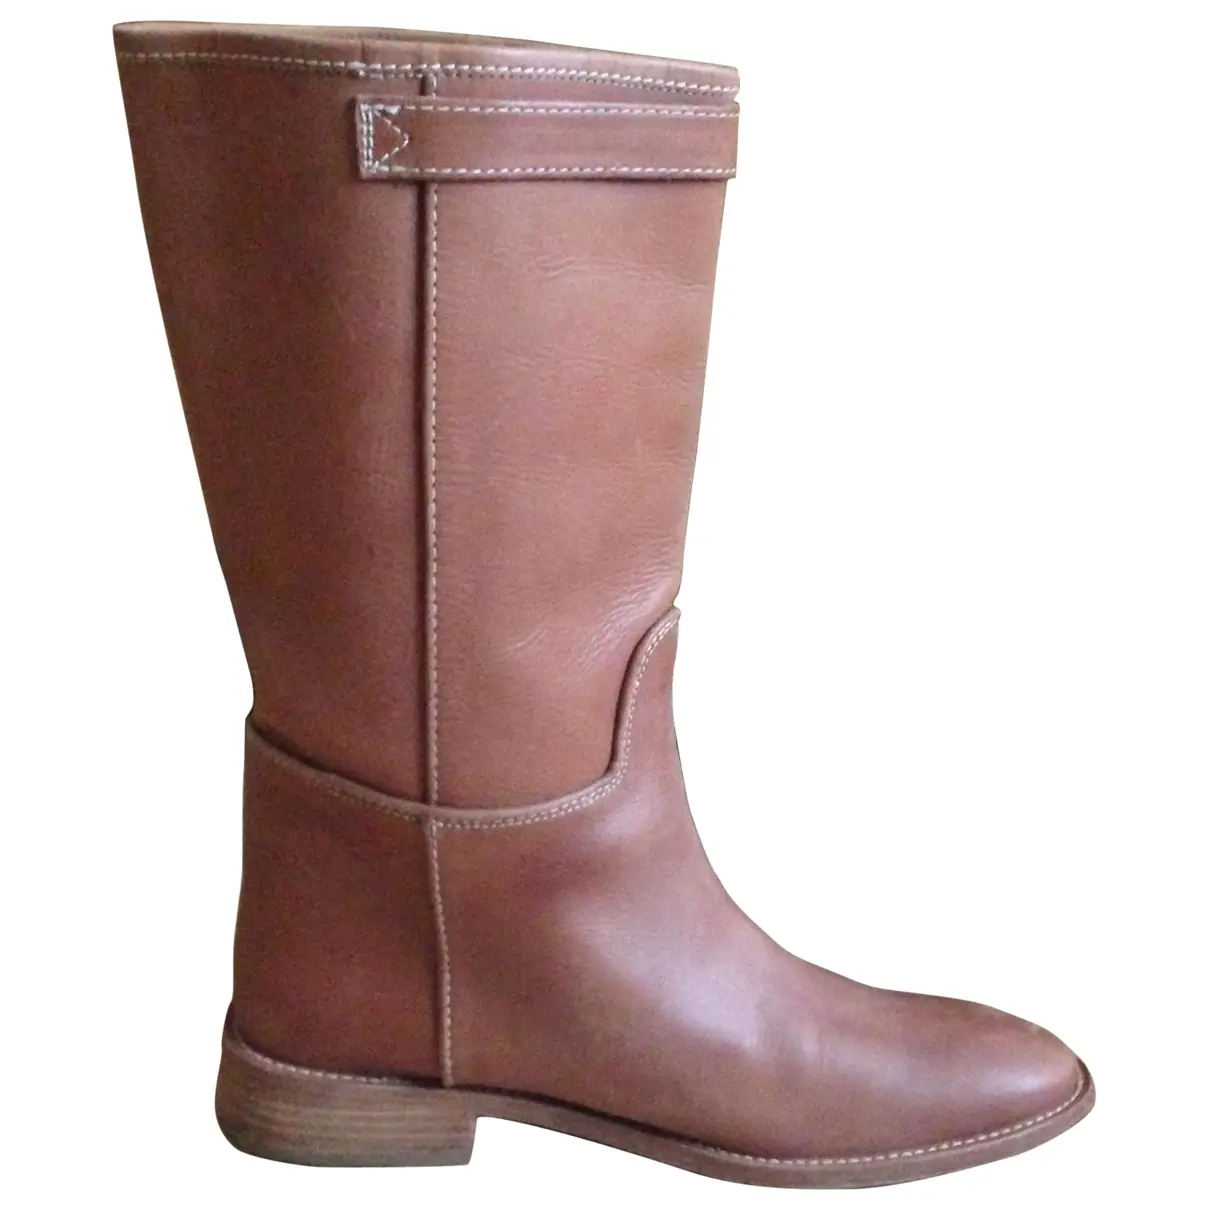 Buy Max Mara Brown Leather Boots online